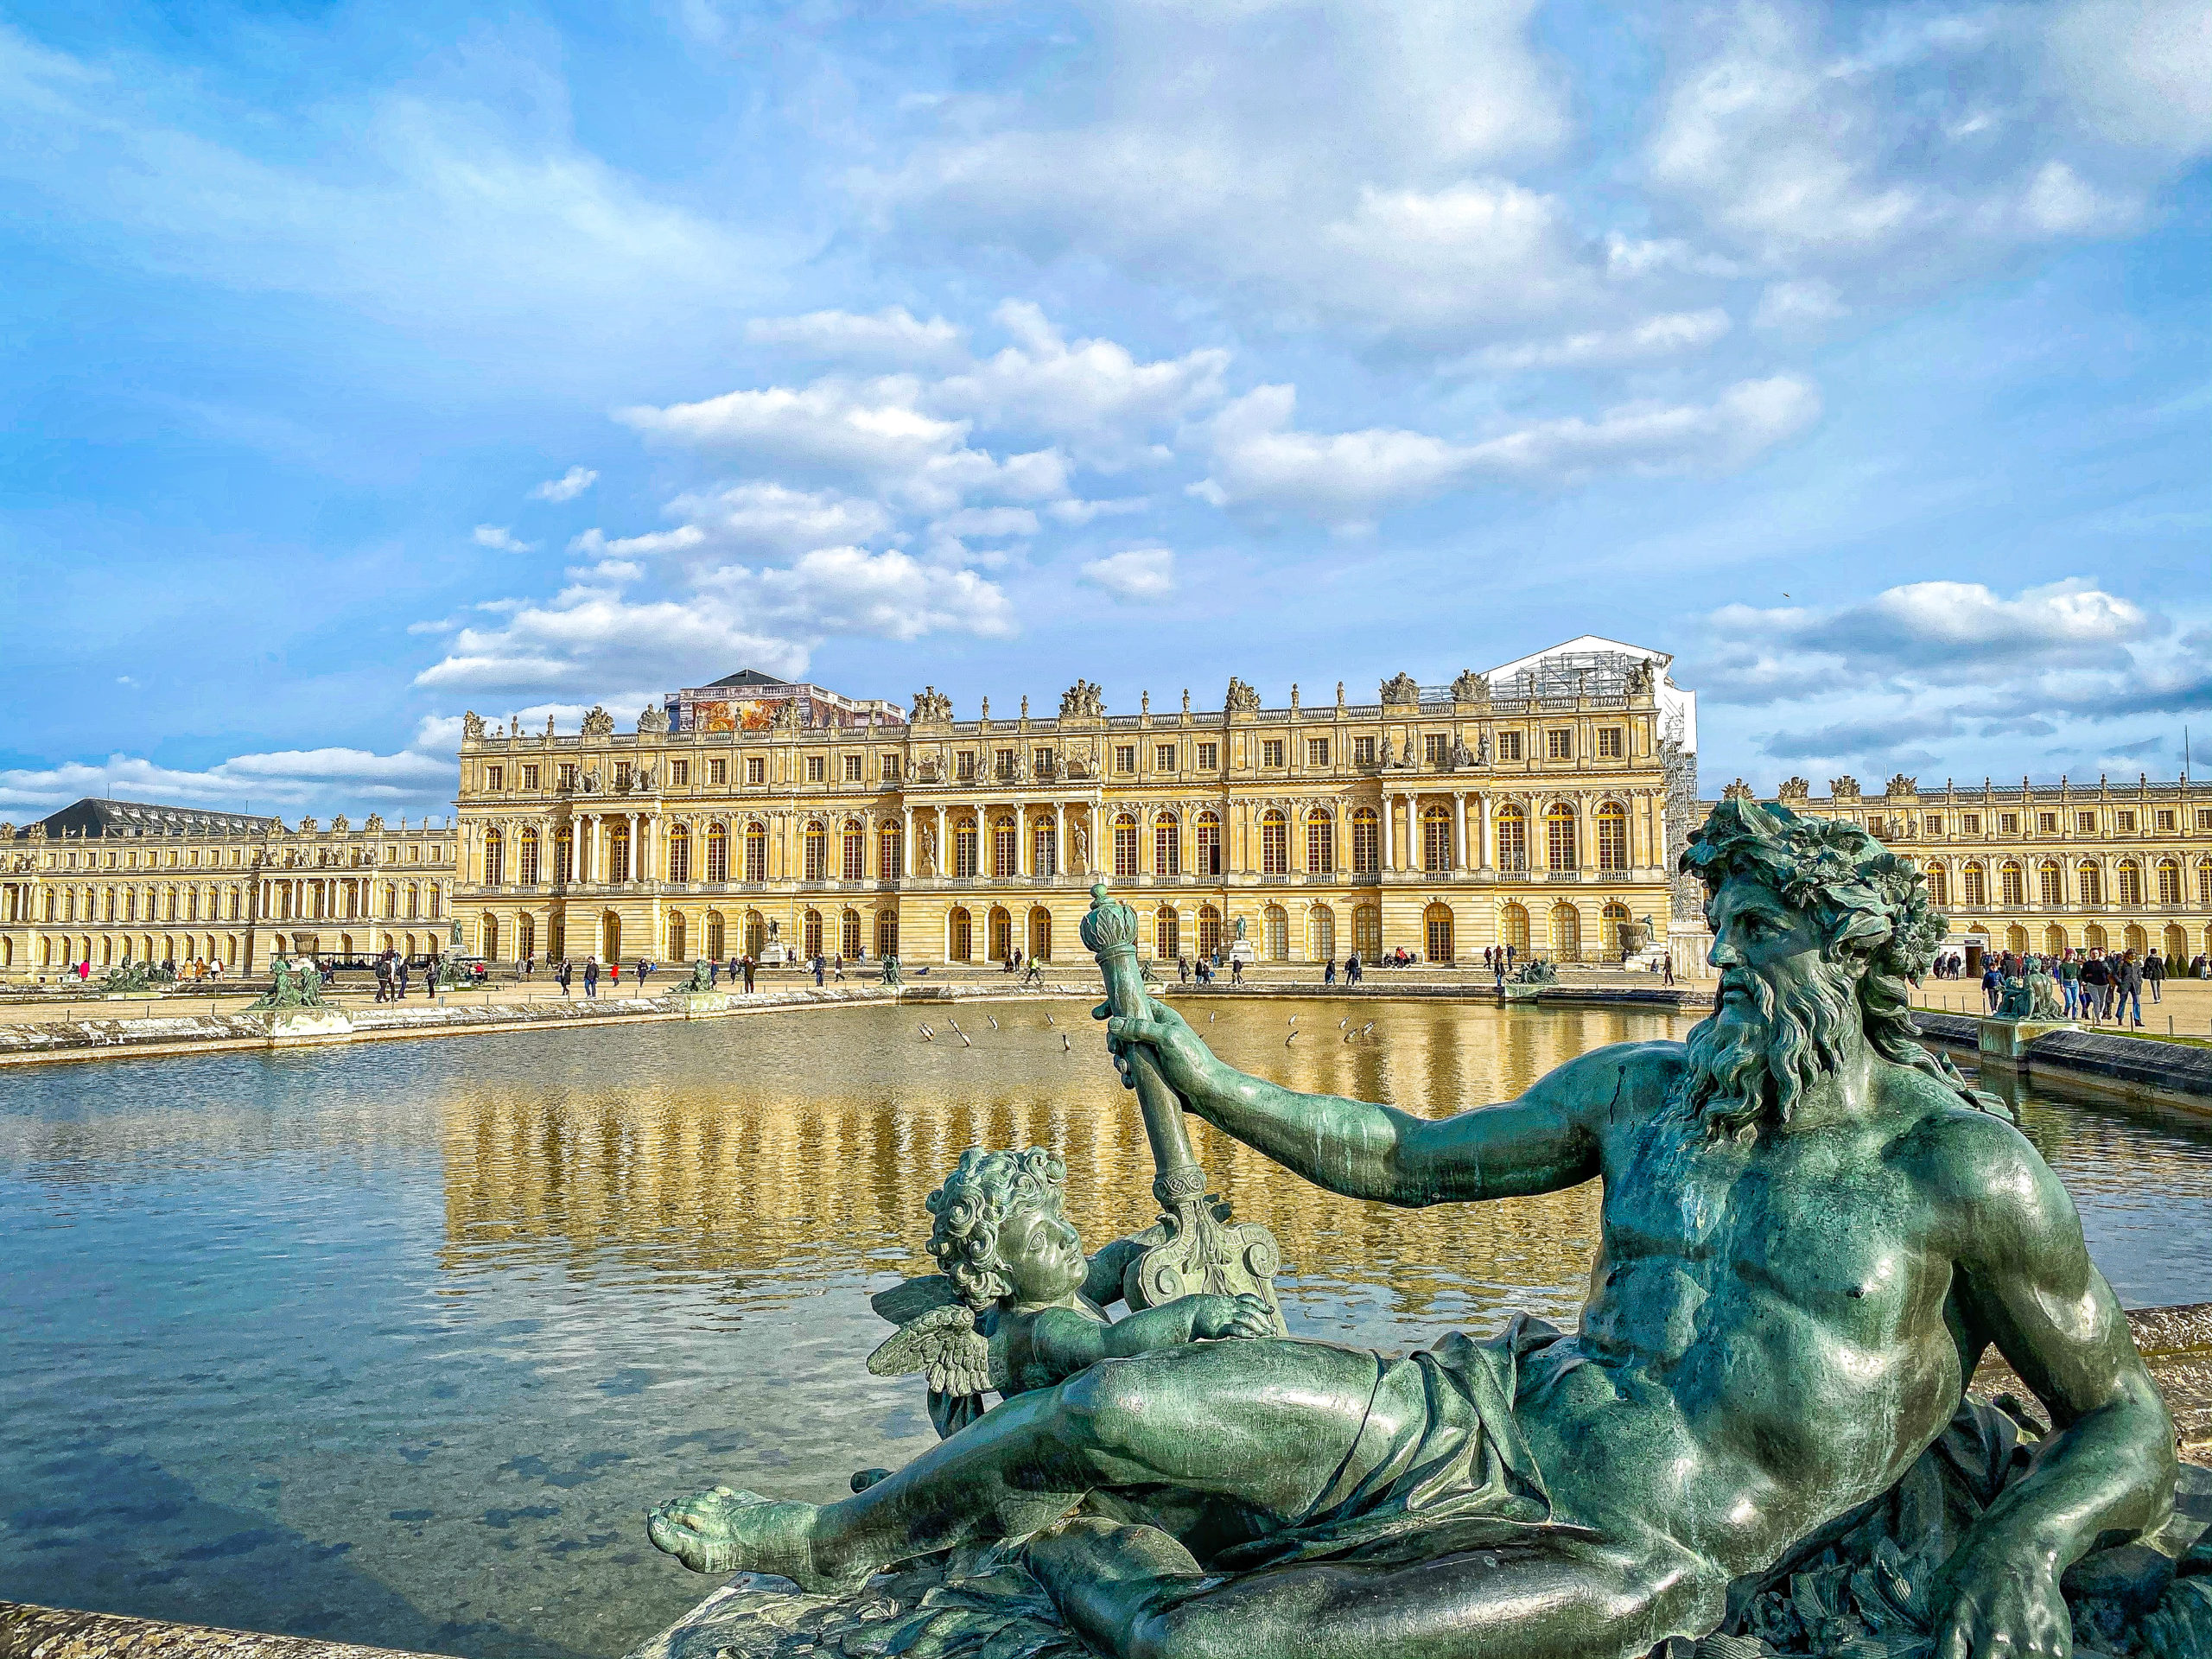 View of Versailles palace and a state of Poseidon in Paris